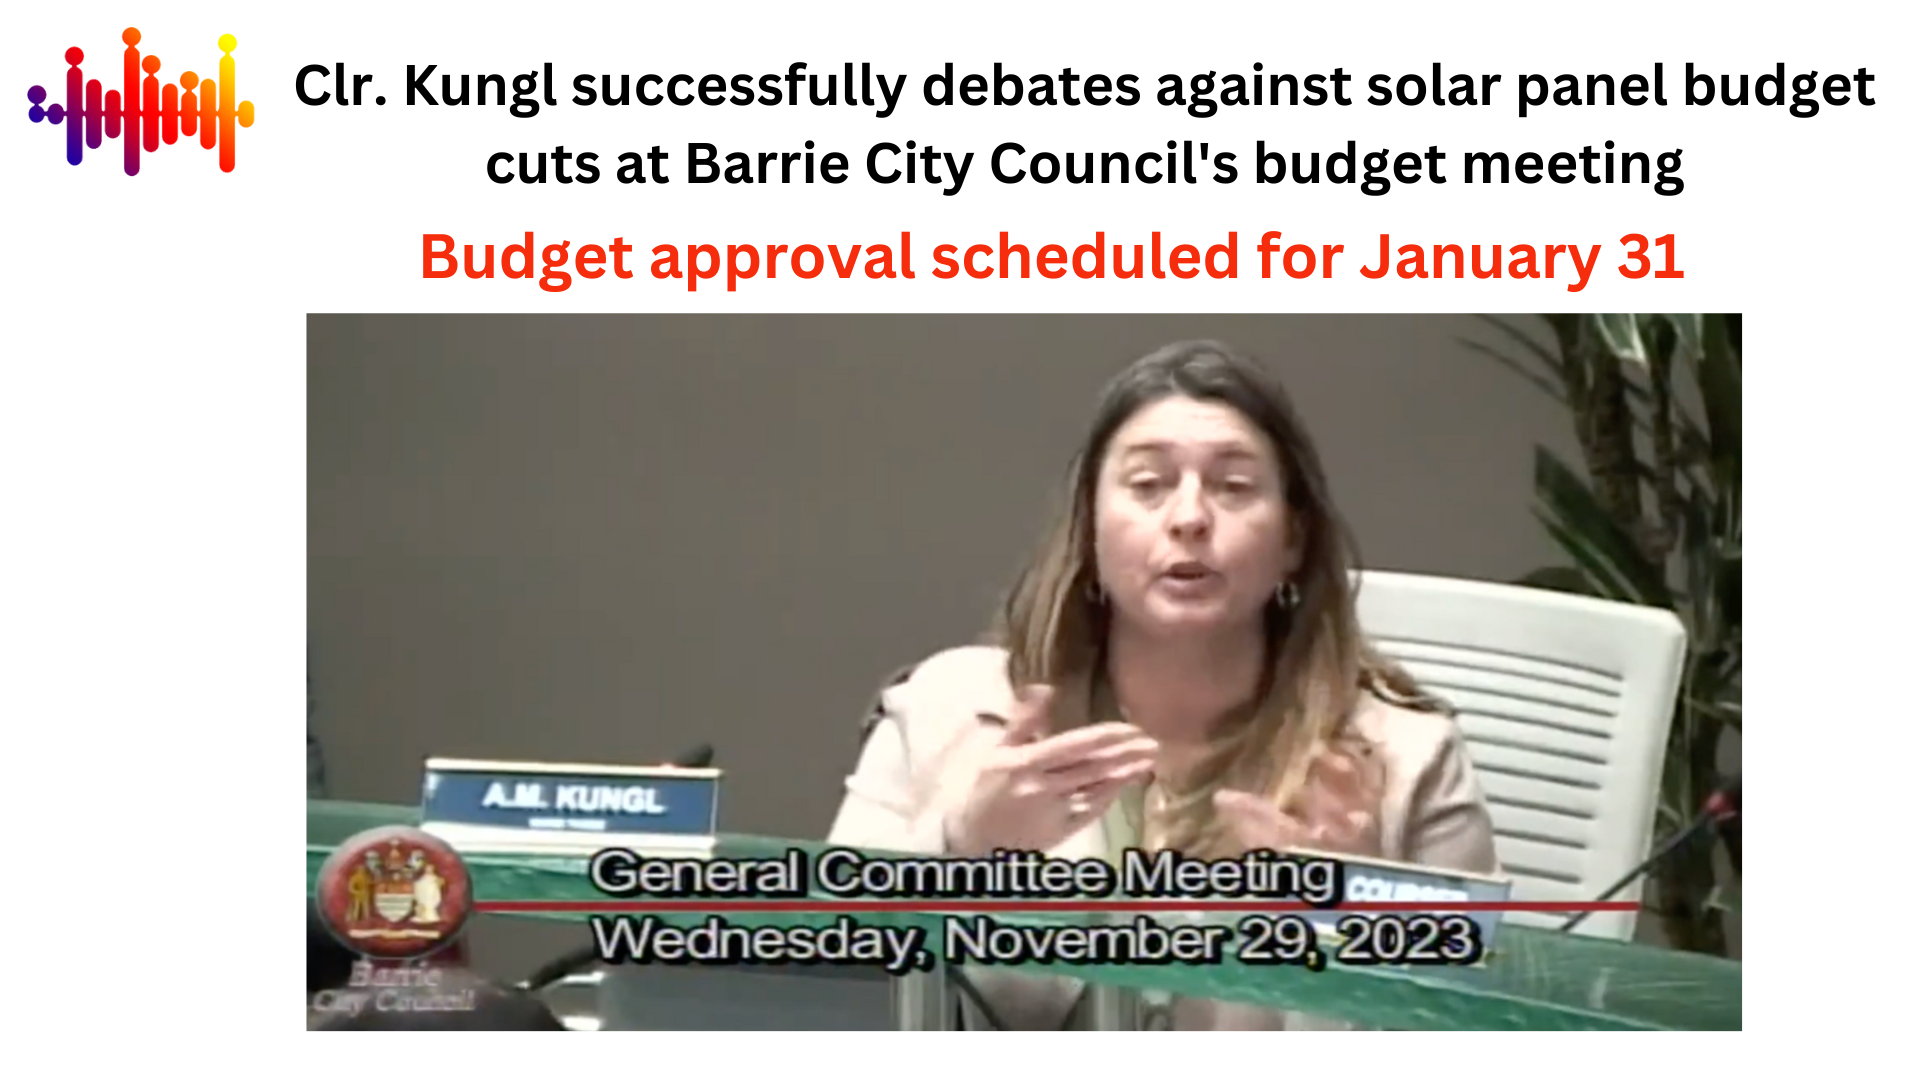 You are currently viewing Clr. Kungl successfully debates against solar panel budget cuts at Barrie City Council’s budget meeting